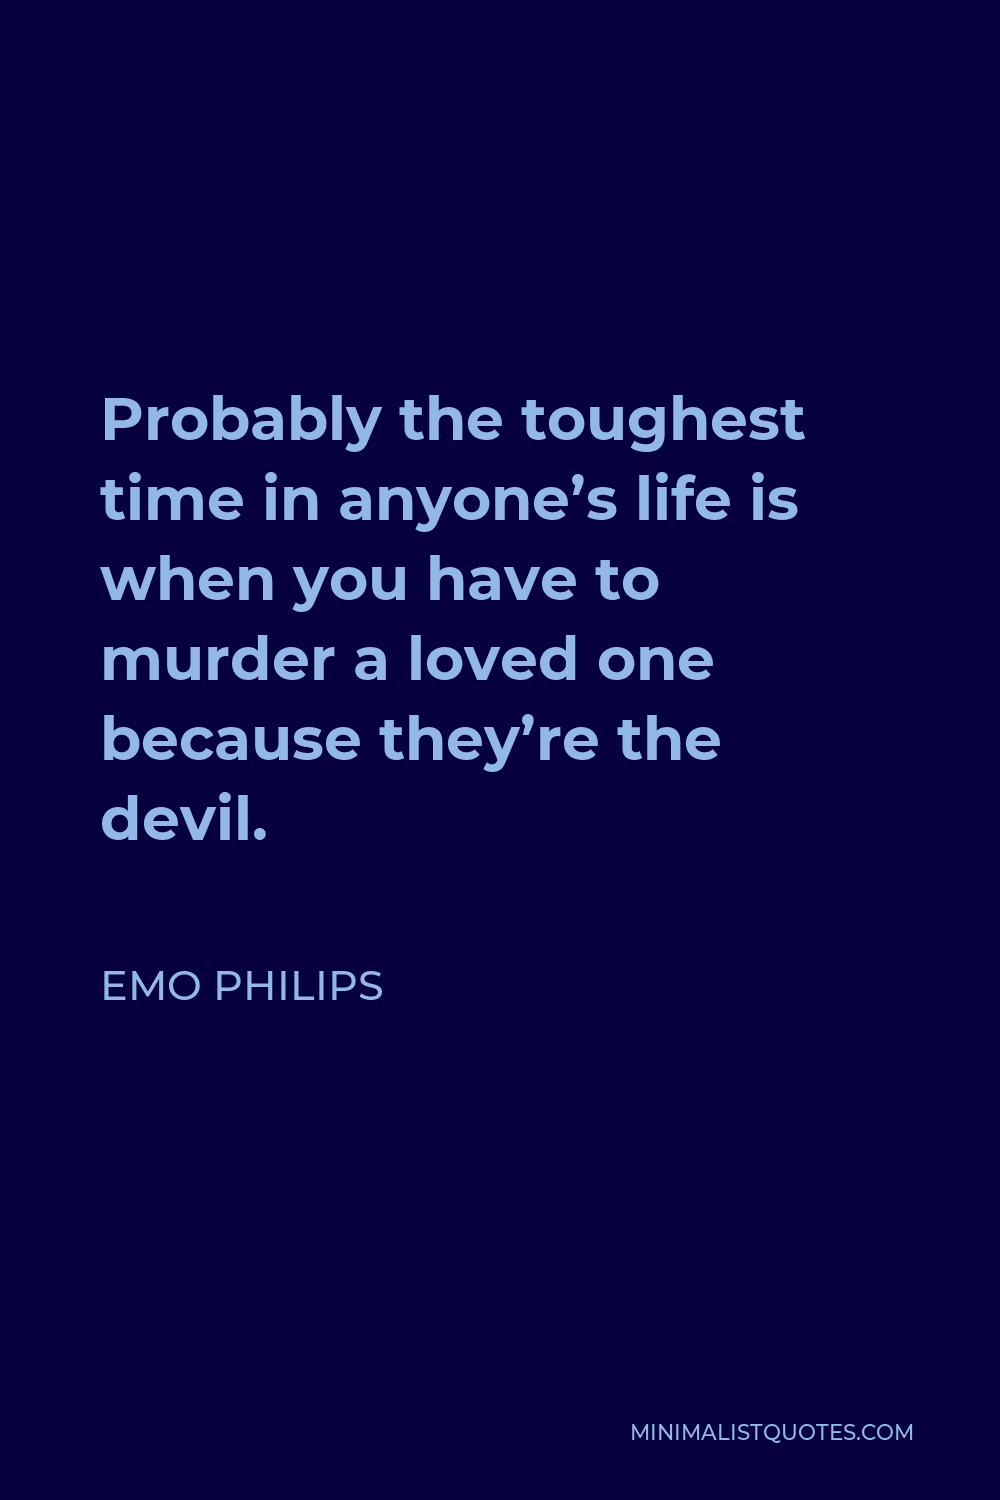 Emo Philips Quote - Probably the toughest time in anyone’s life is when you have to murder a loved one because they’re the devil.